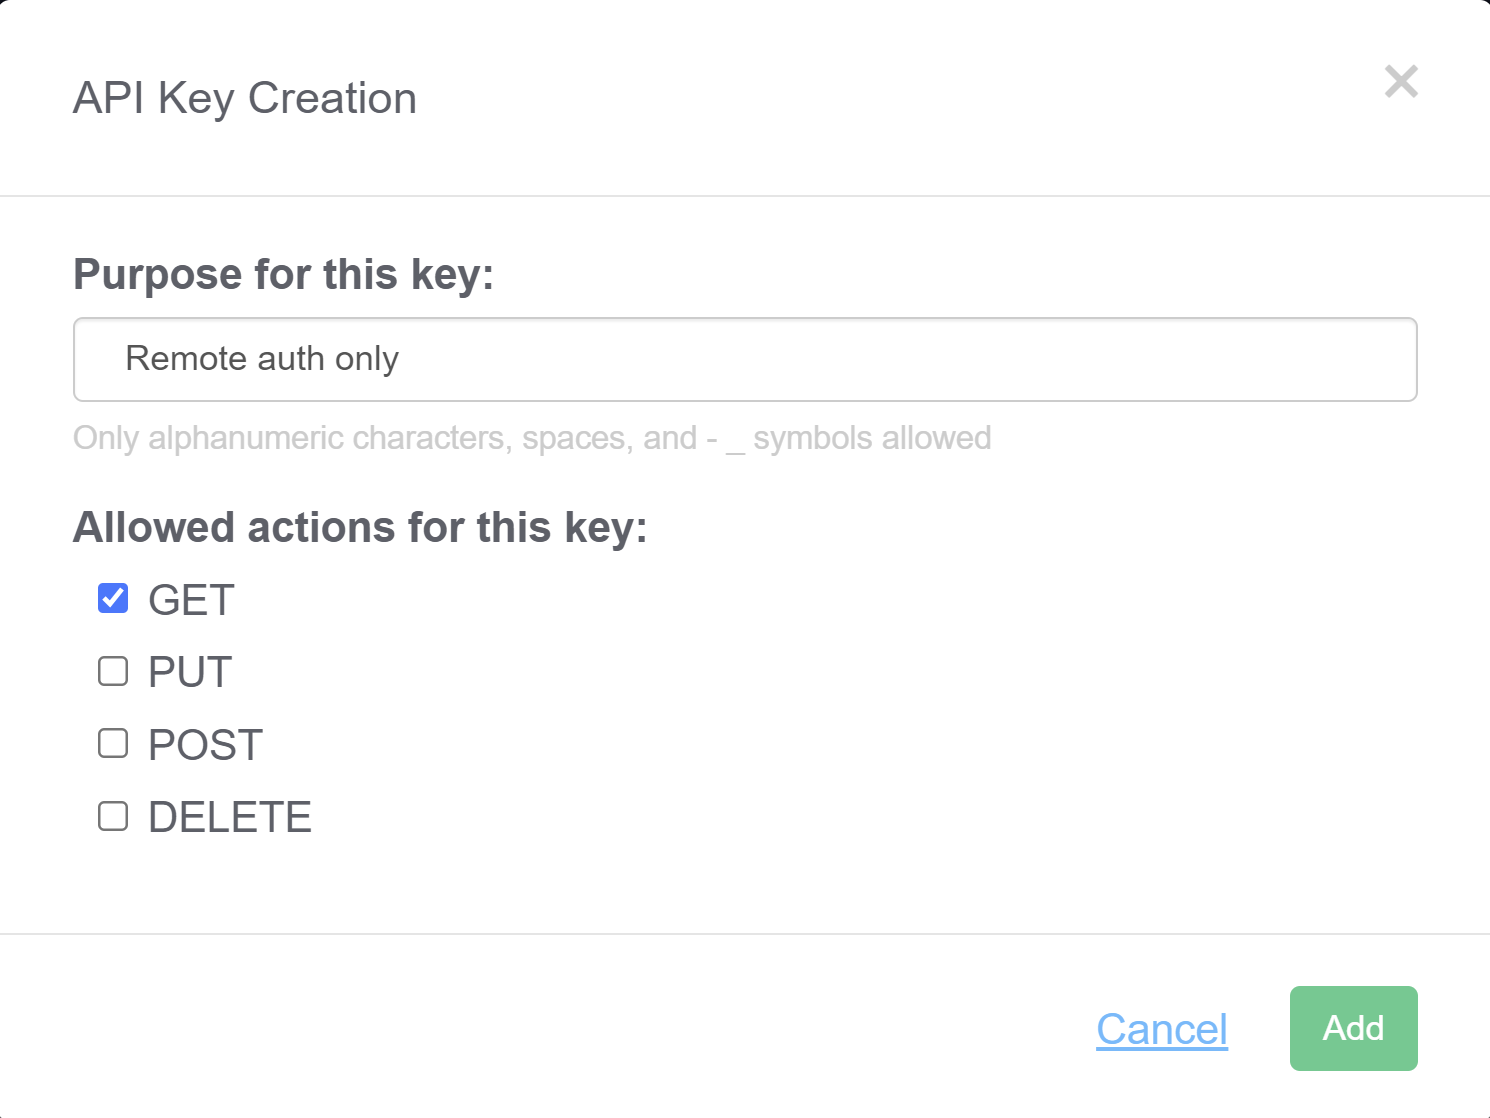 screenshot of the API Key Creation pop-up with the purpose listed as "Remote auth only" and the GET action as the only checked action